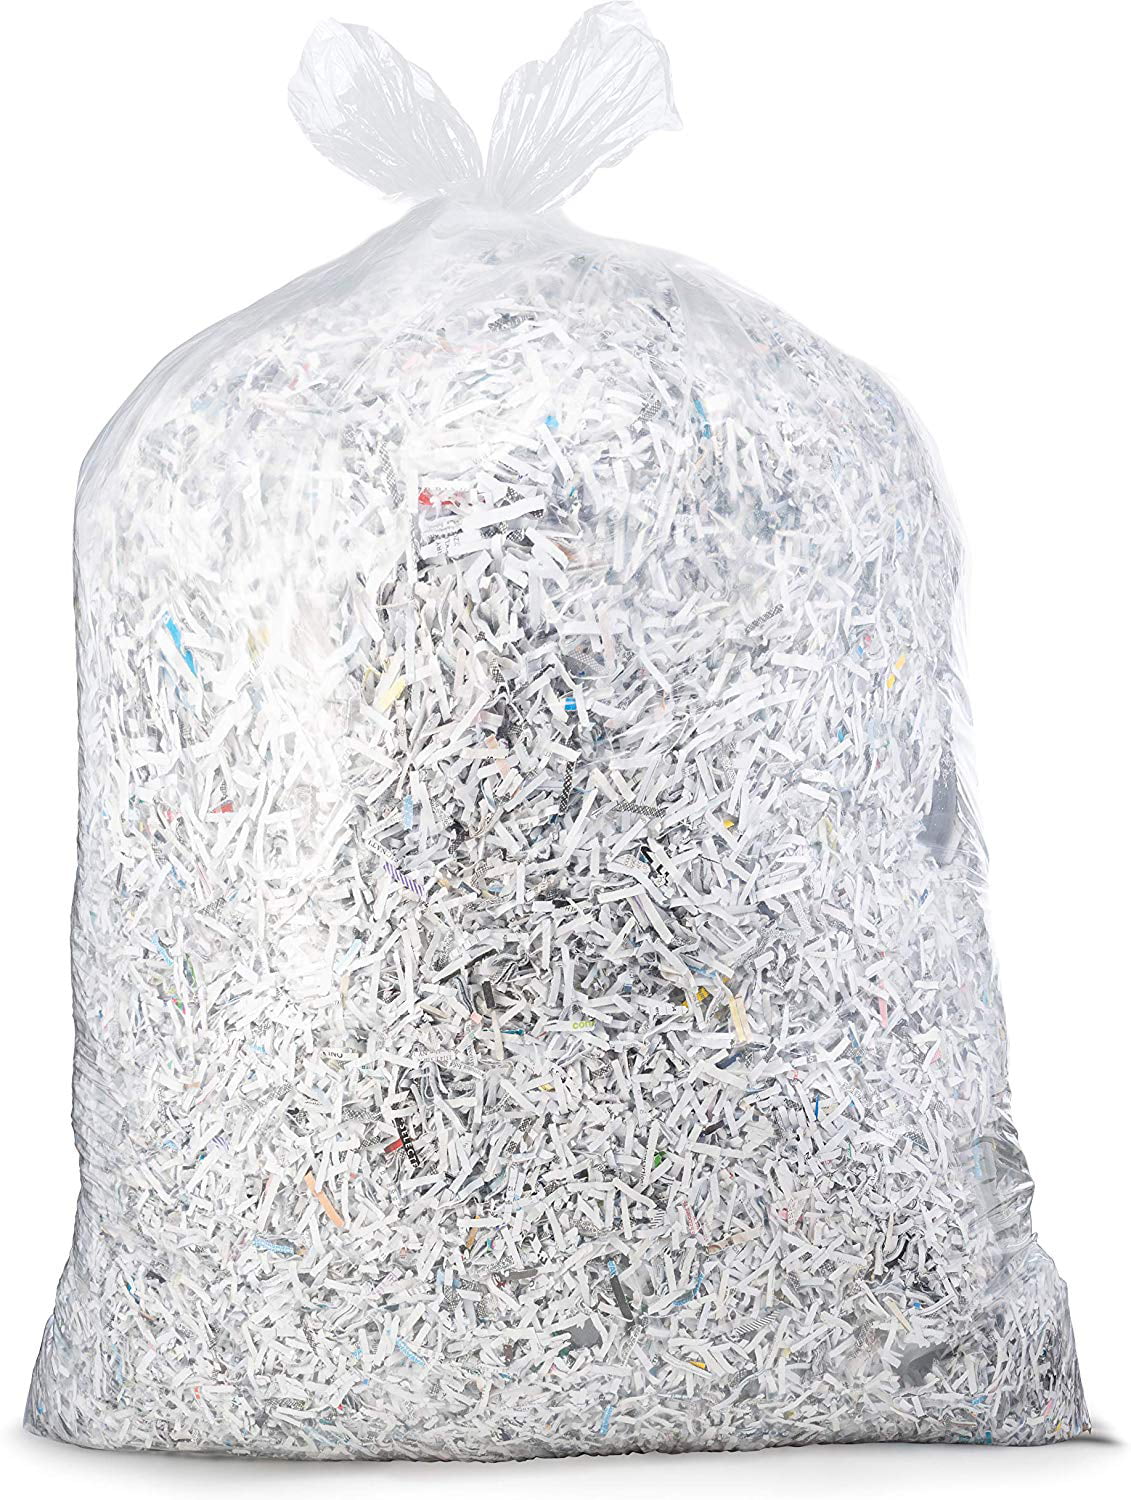 Details about   95-96 Gallon Clear Garbage Bags 25 Count Super Heavy Duty Extra Large 61"X 68" 